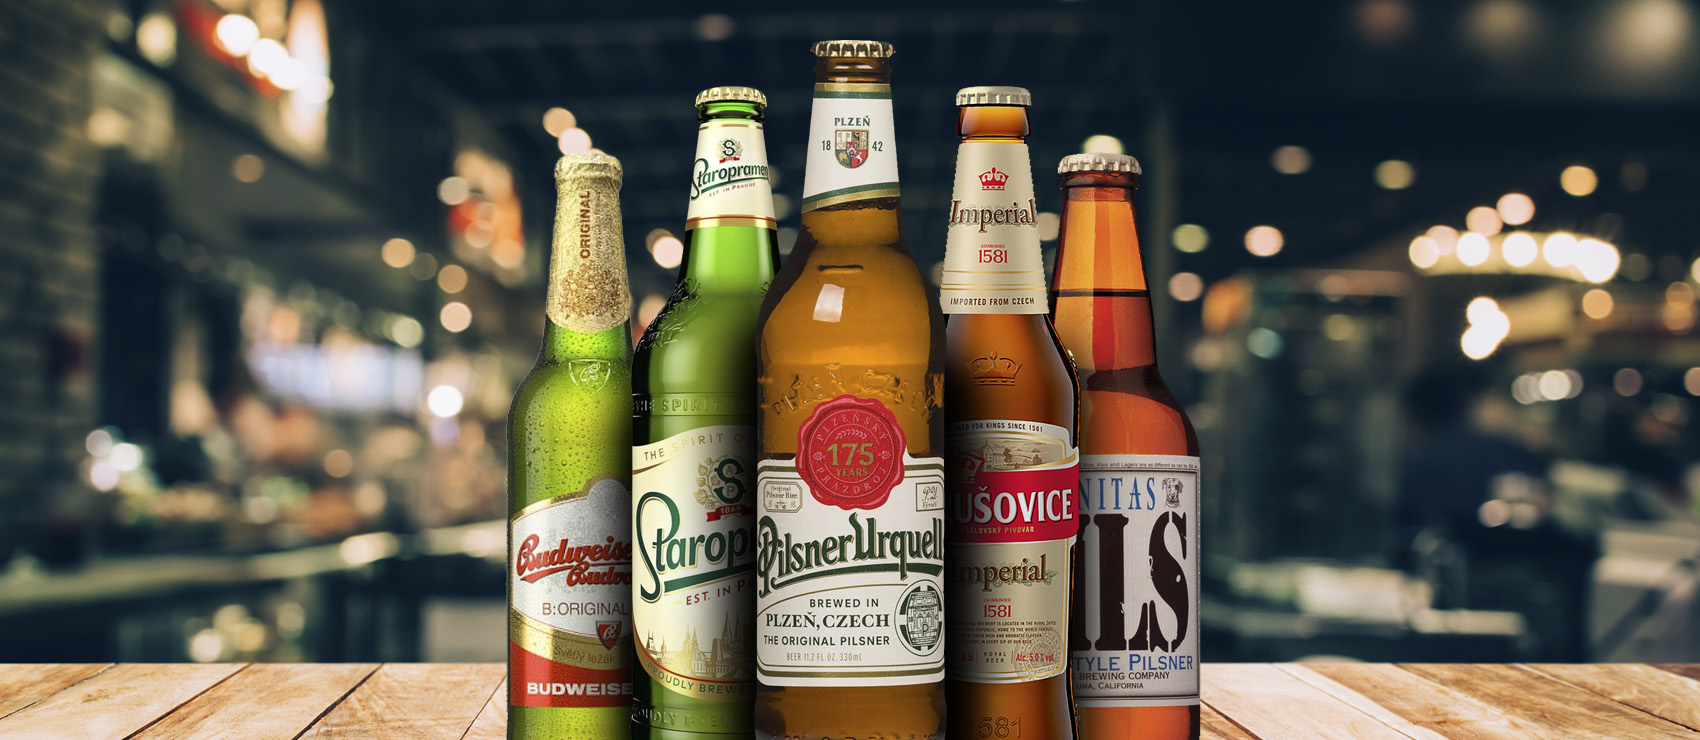 Best Rated Beers (styles And Brands) in The World - TasteAtlas